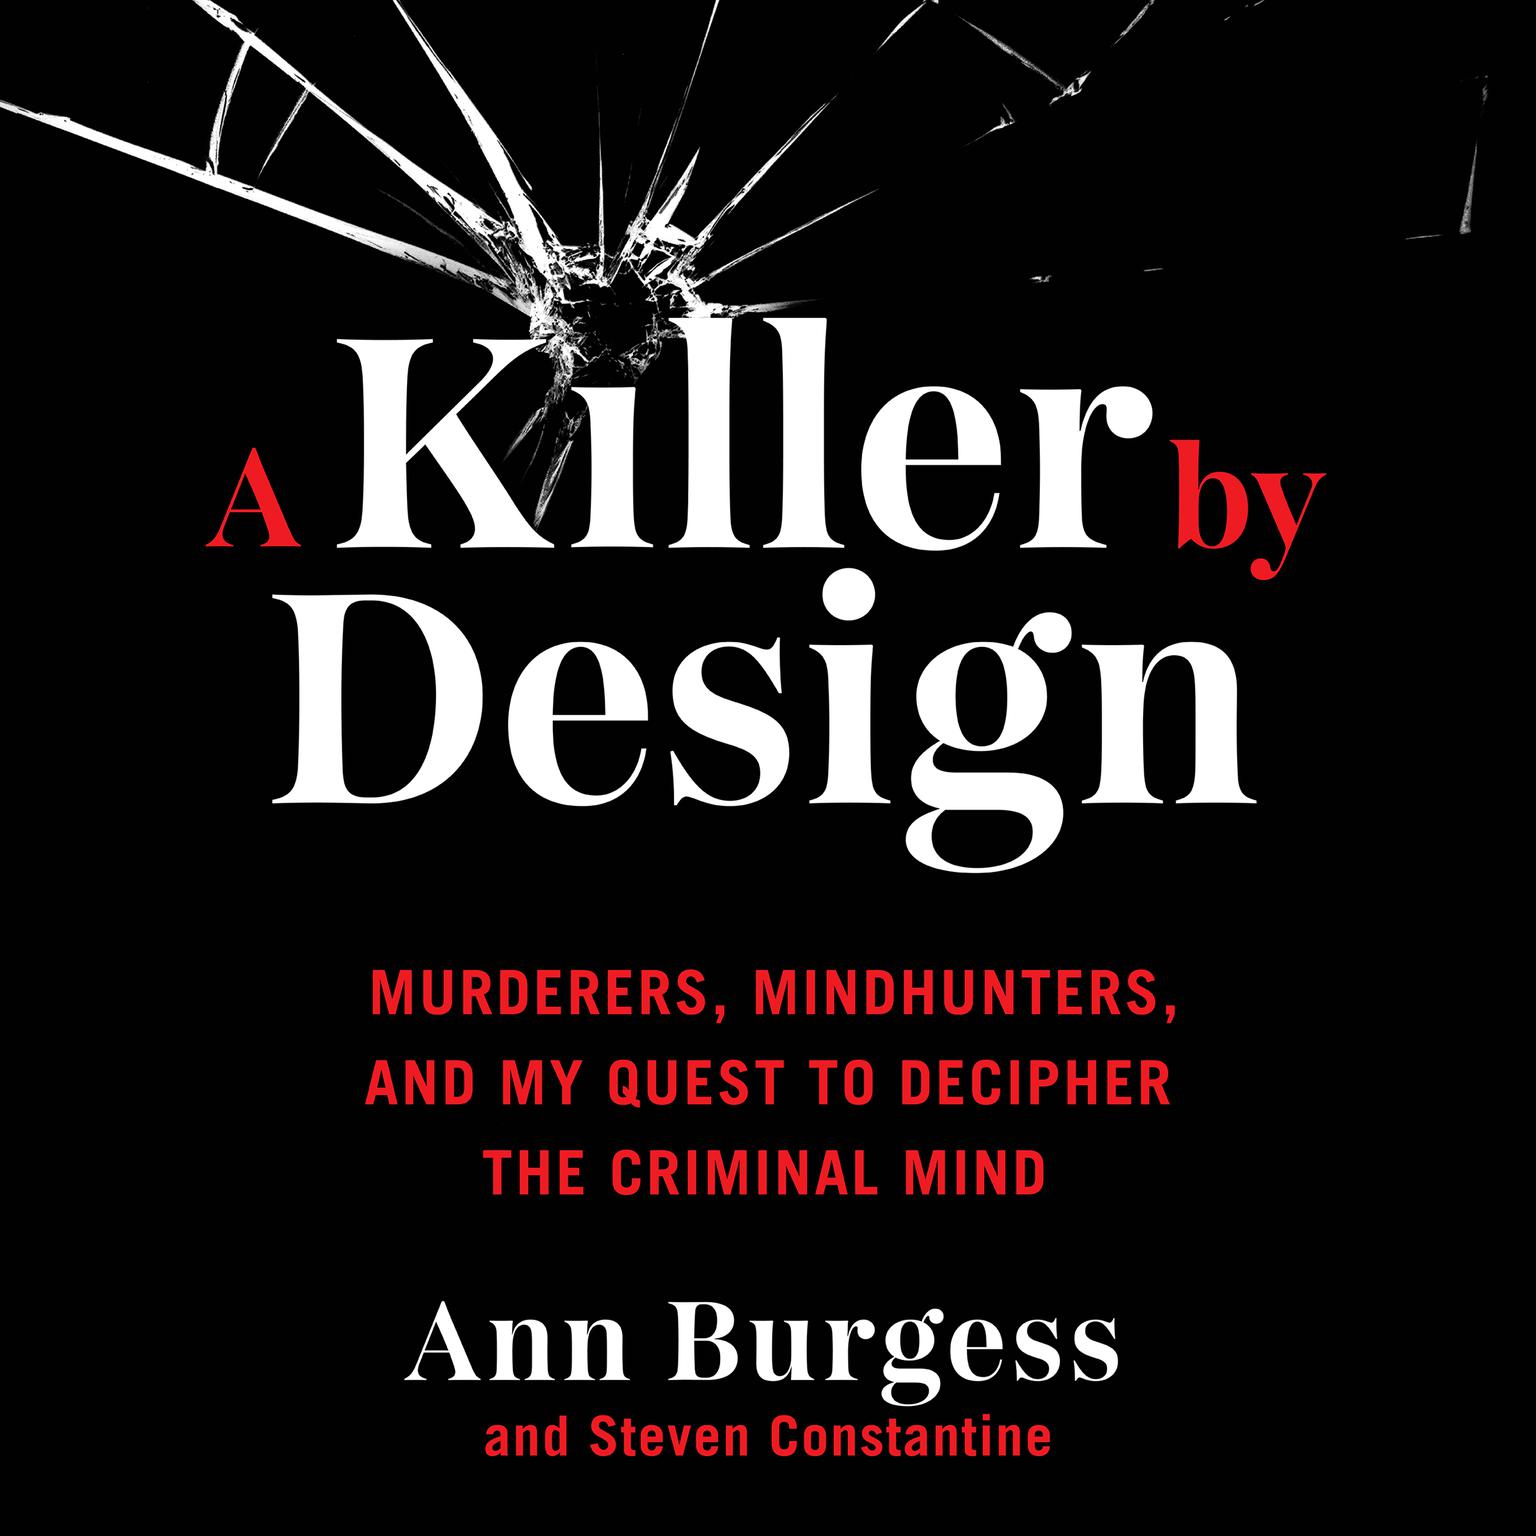 A Killer by Design: Murderers, Mindhunters, and My Quest to Decipher the Criminal Mind Audiobook, by Ann Wolbert Burgess